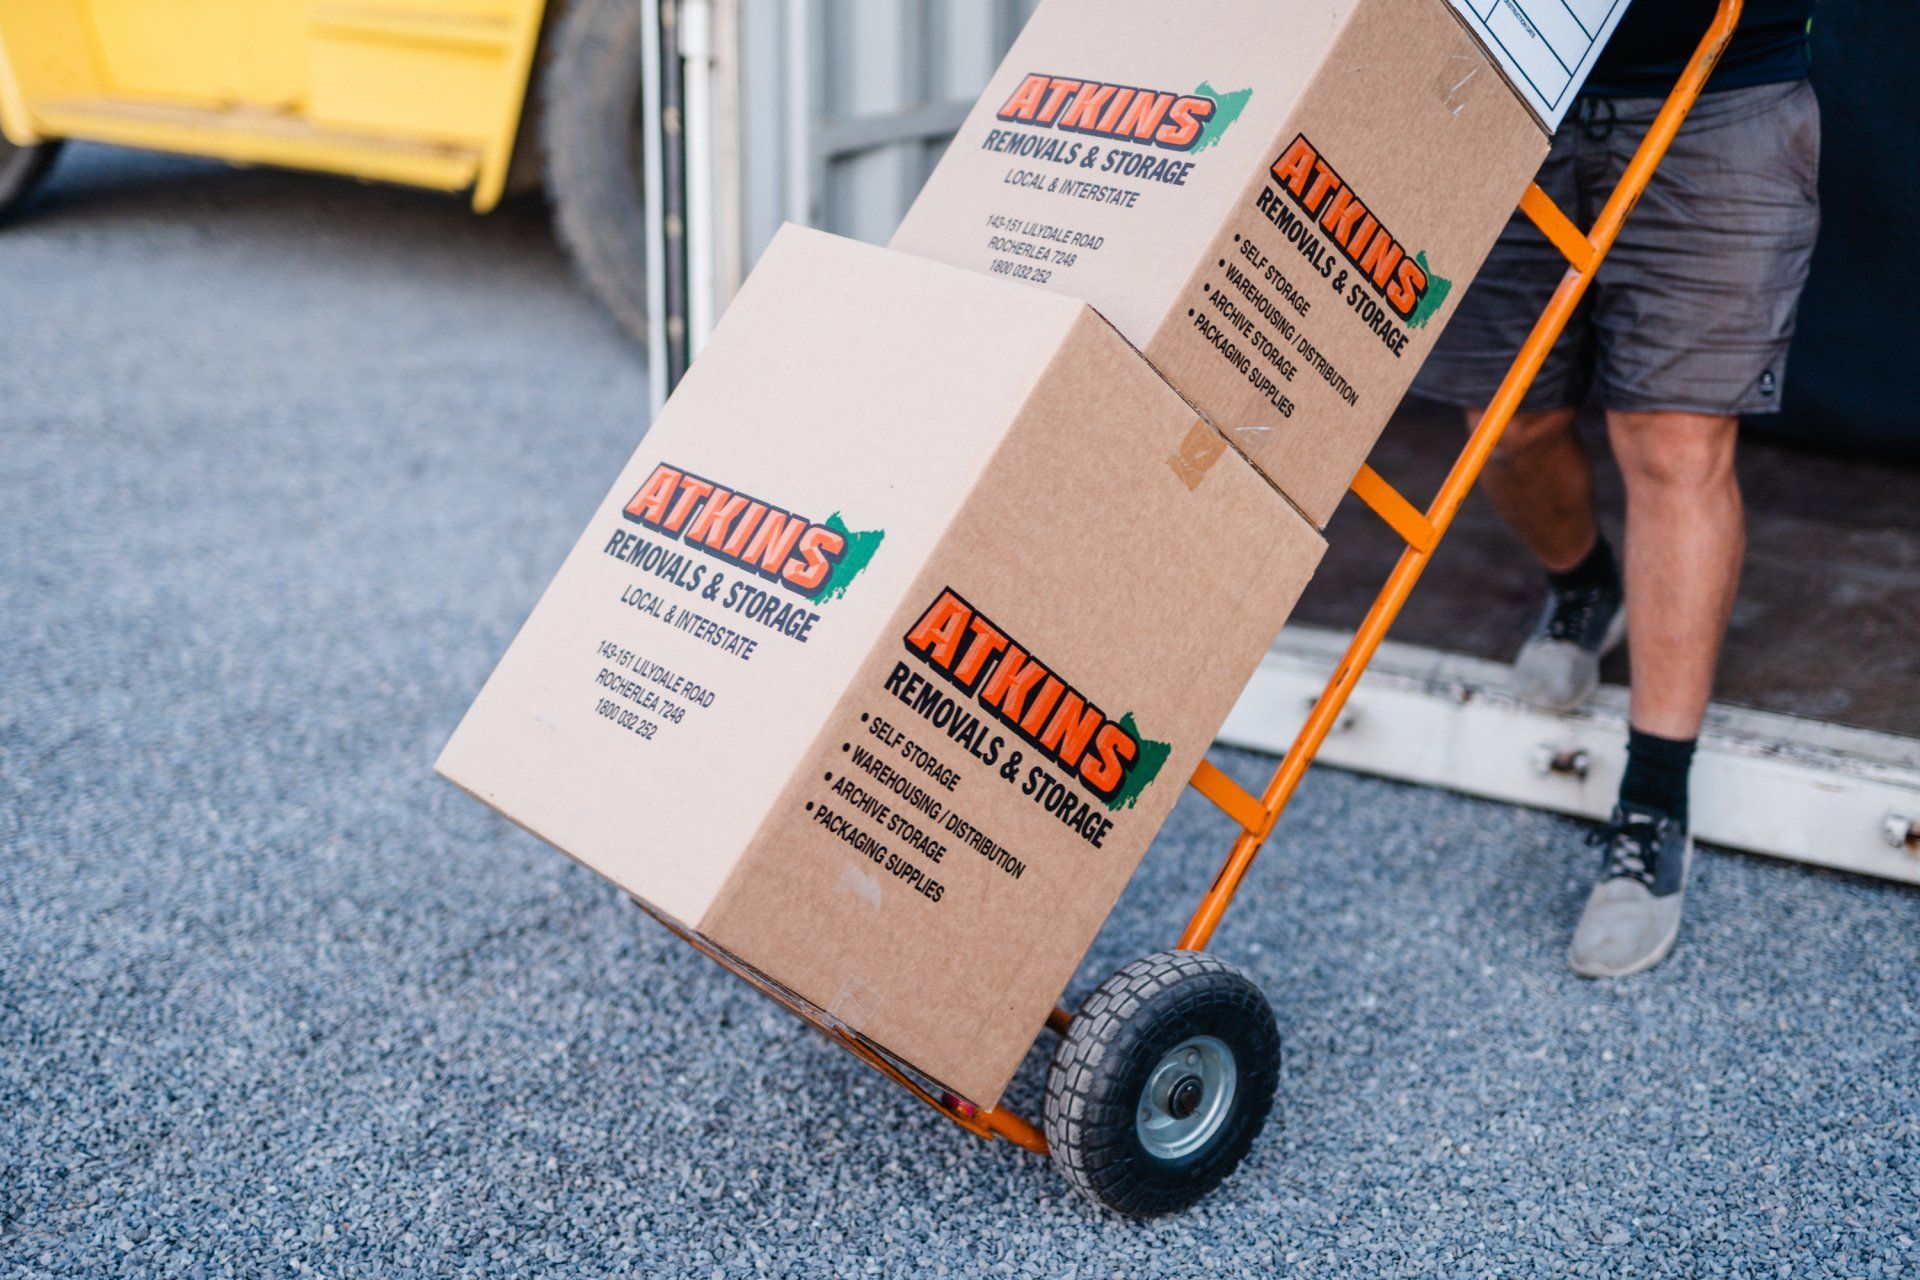 A Cart with Two Boxes | Launceston, Tas | Atkins Removals & Storage Pty Ltd